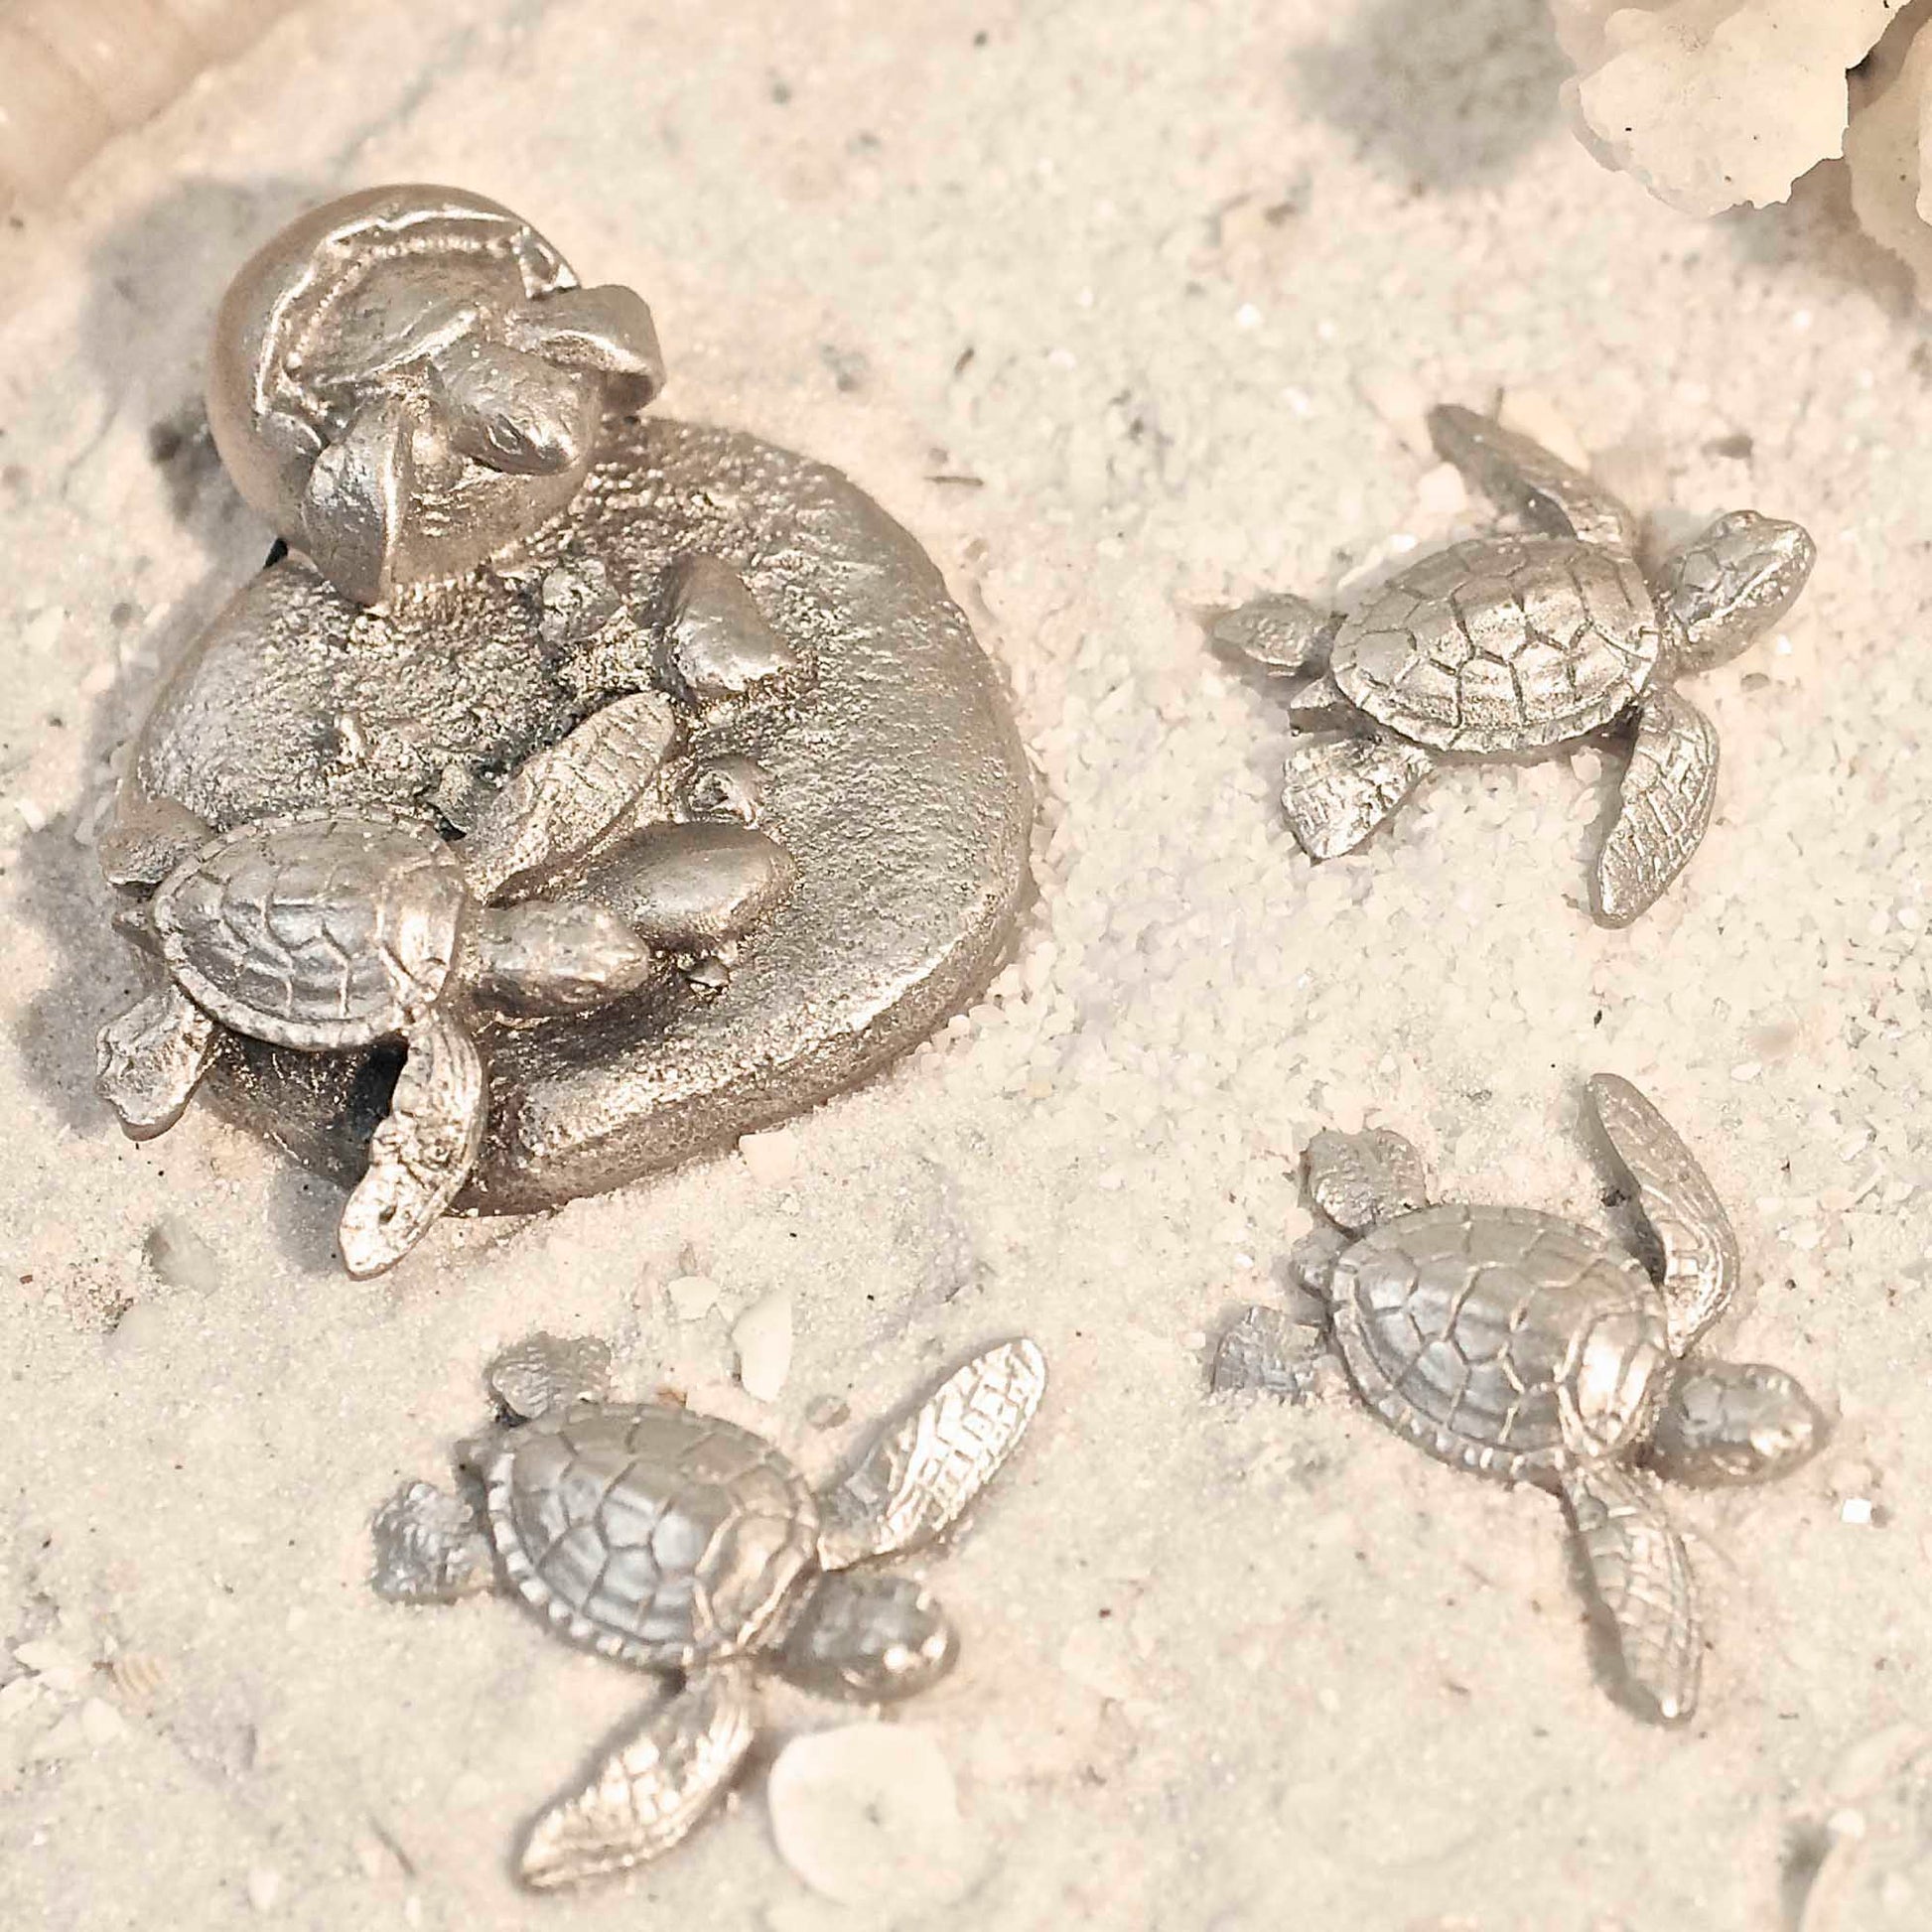 Baby Sea Turtle Magnets, Sea Life Magnets, Magnetic Sea Turtles, Gifts for Turtle Lovers, Baby Hatching Magnets, Turtle Gifts for Teachers - The Tool Store